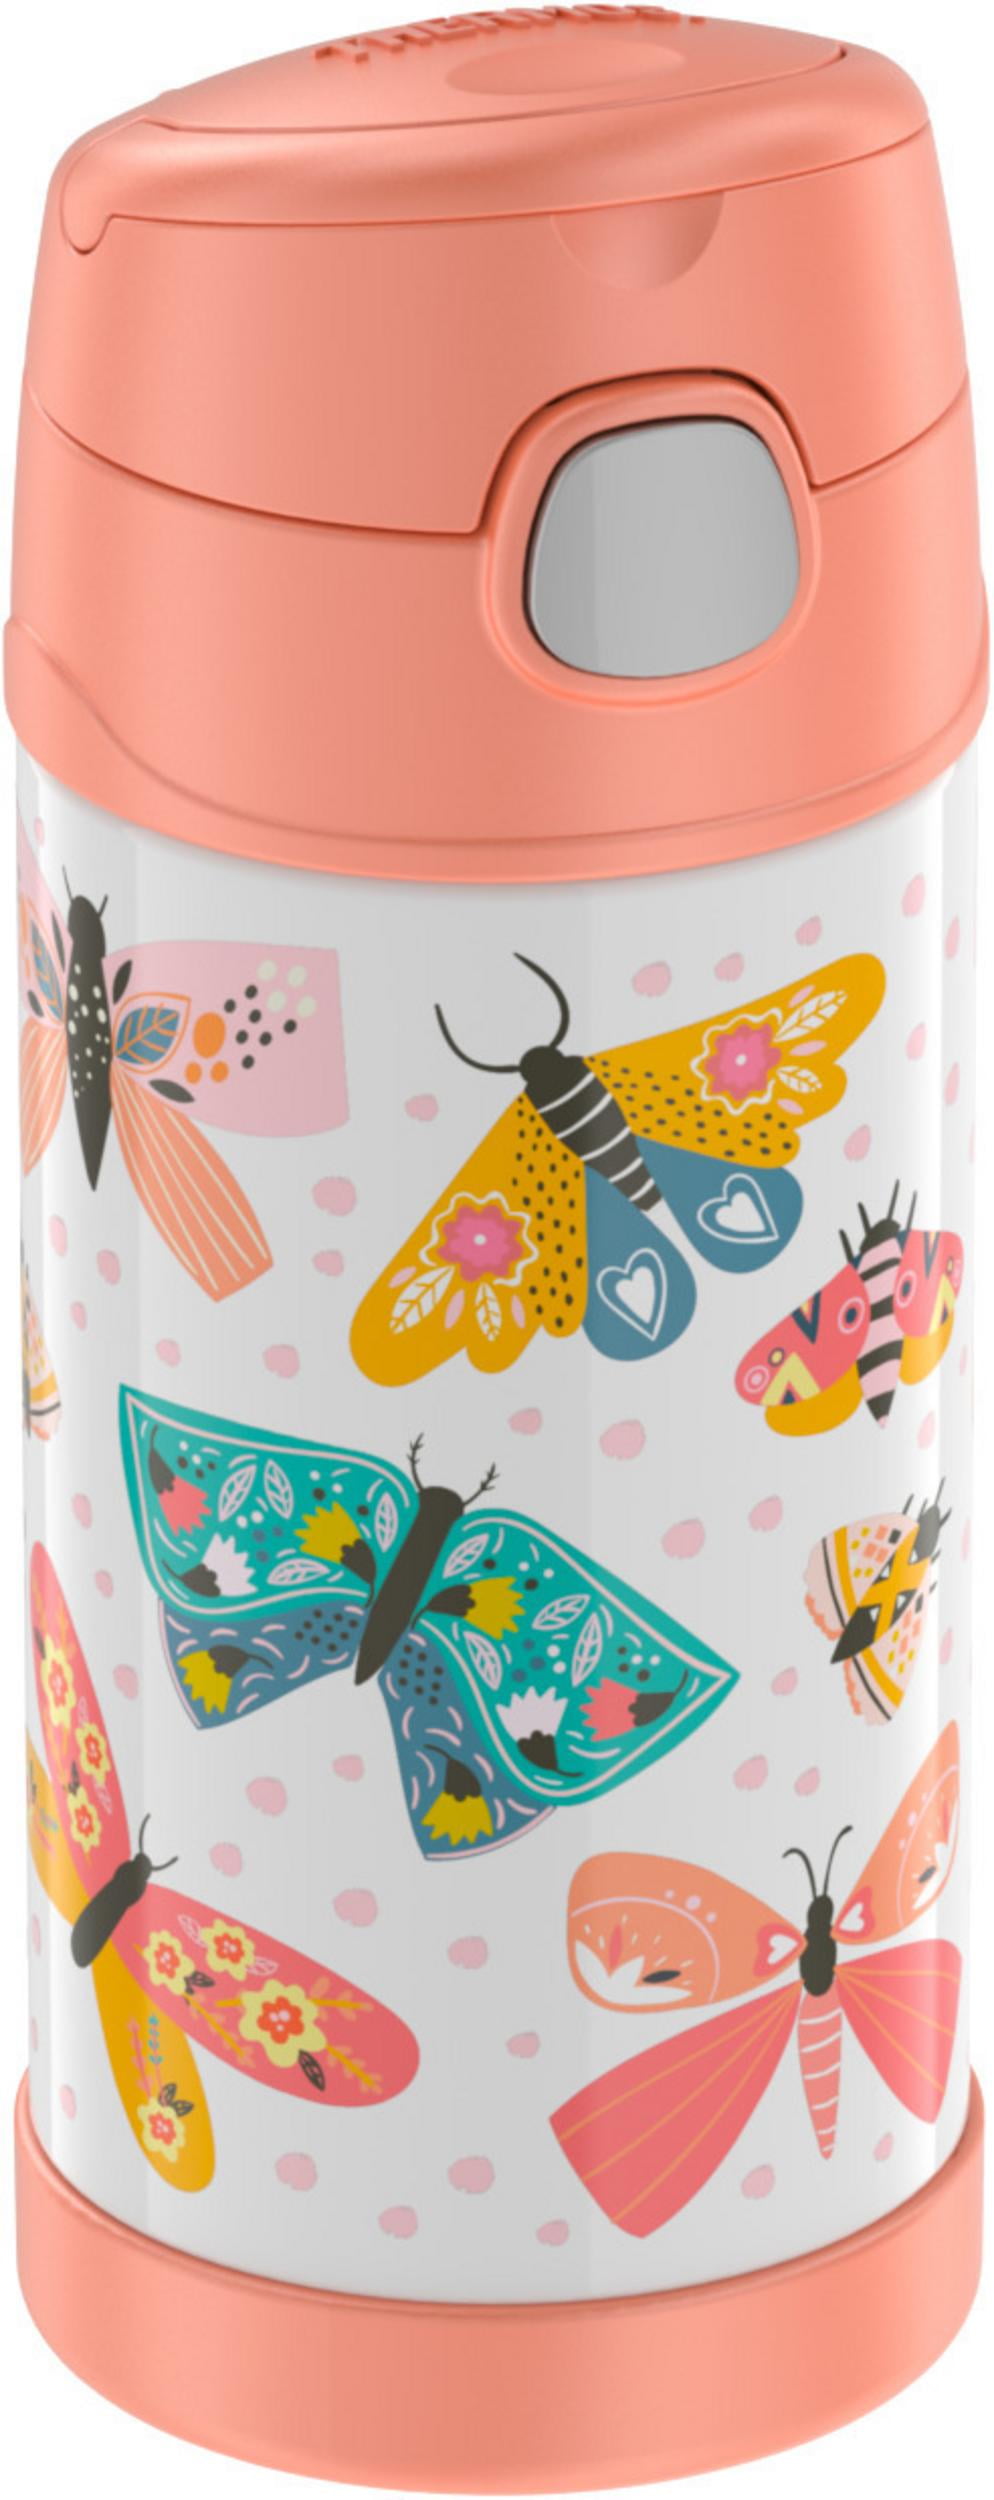  GOODOLD Butterflies Vintage Kids Water Bottle, Insulated Stainless  Steel Water Bottles with Straw Lid, 12 oz BPA-Free Leakproof Duck Mouth  Thermos for Boys Girls: Home & Kitchen